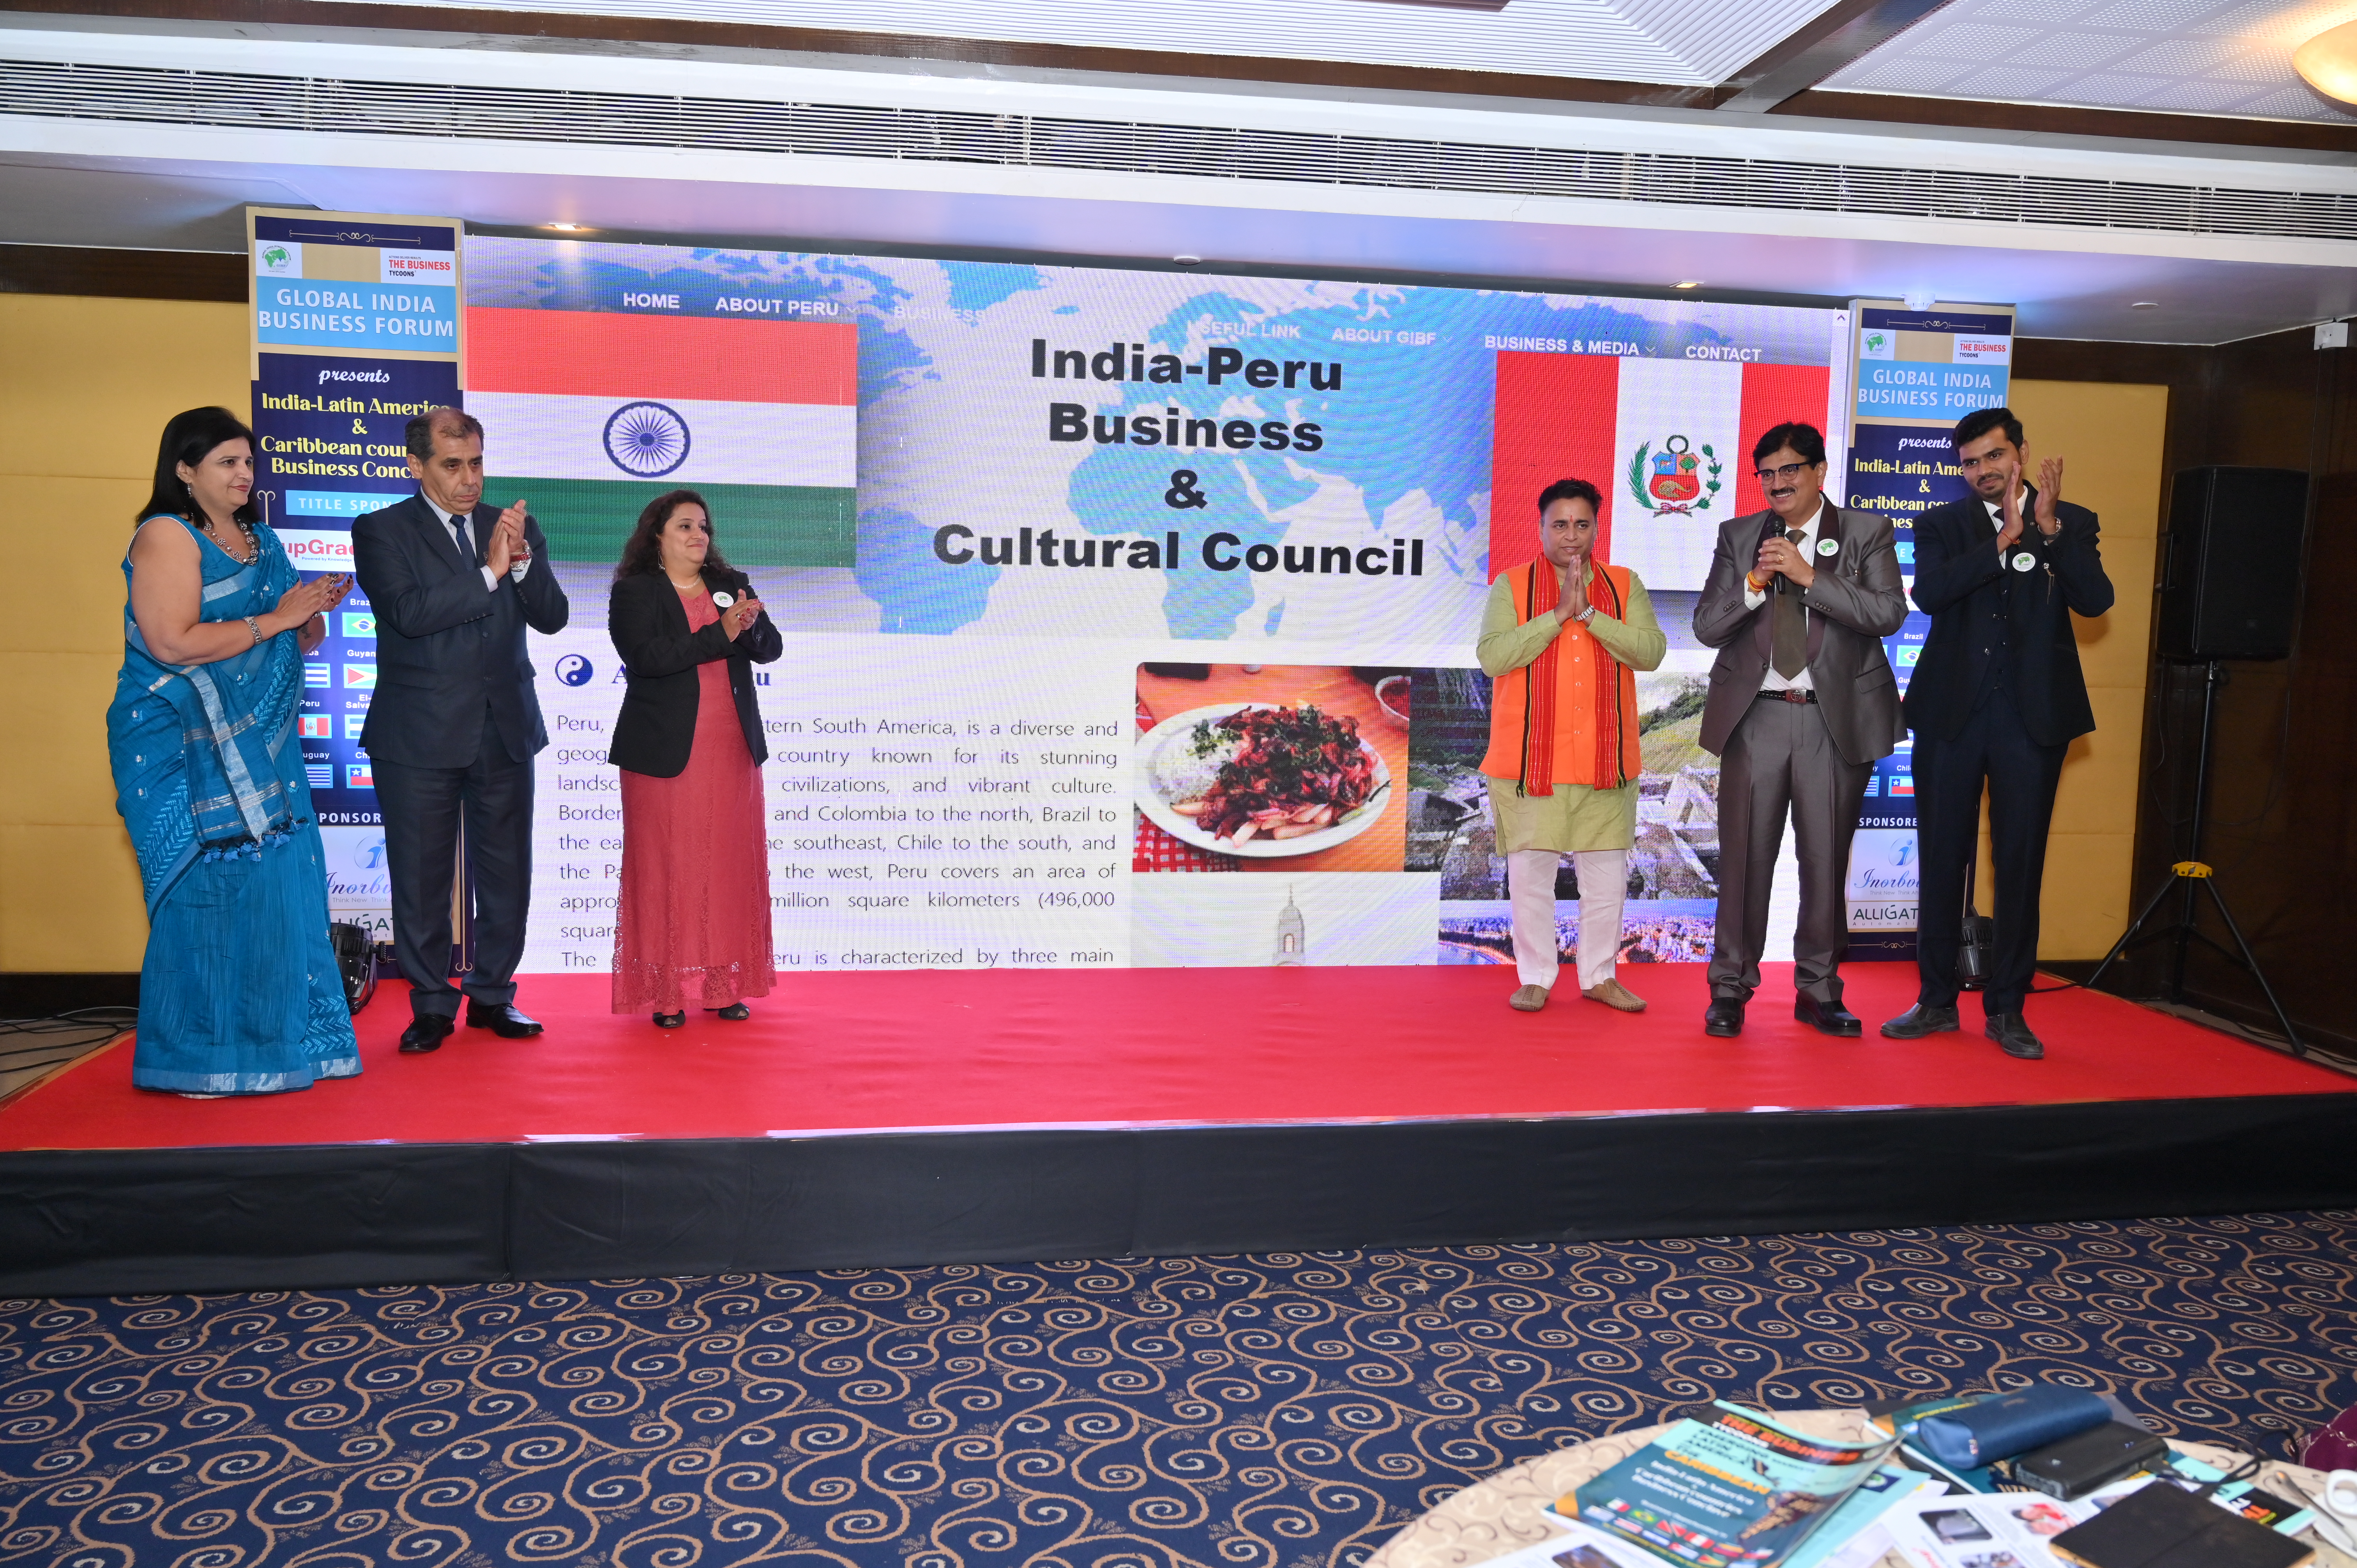 gibf-past-event-india-latin-america-and-caribbean-country-business-conclave-peru-website-of-india-peru-business-and-cultural-council-2024